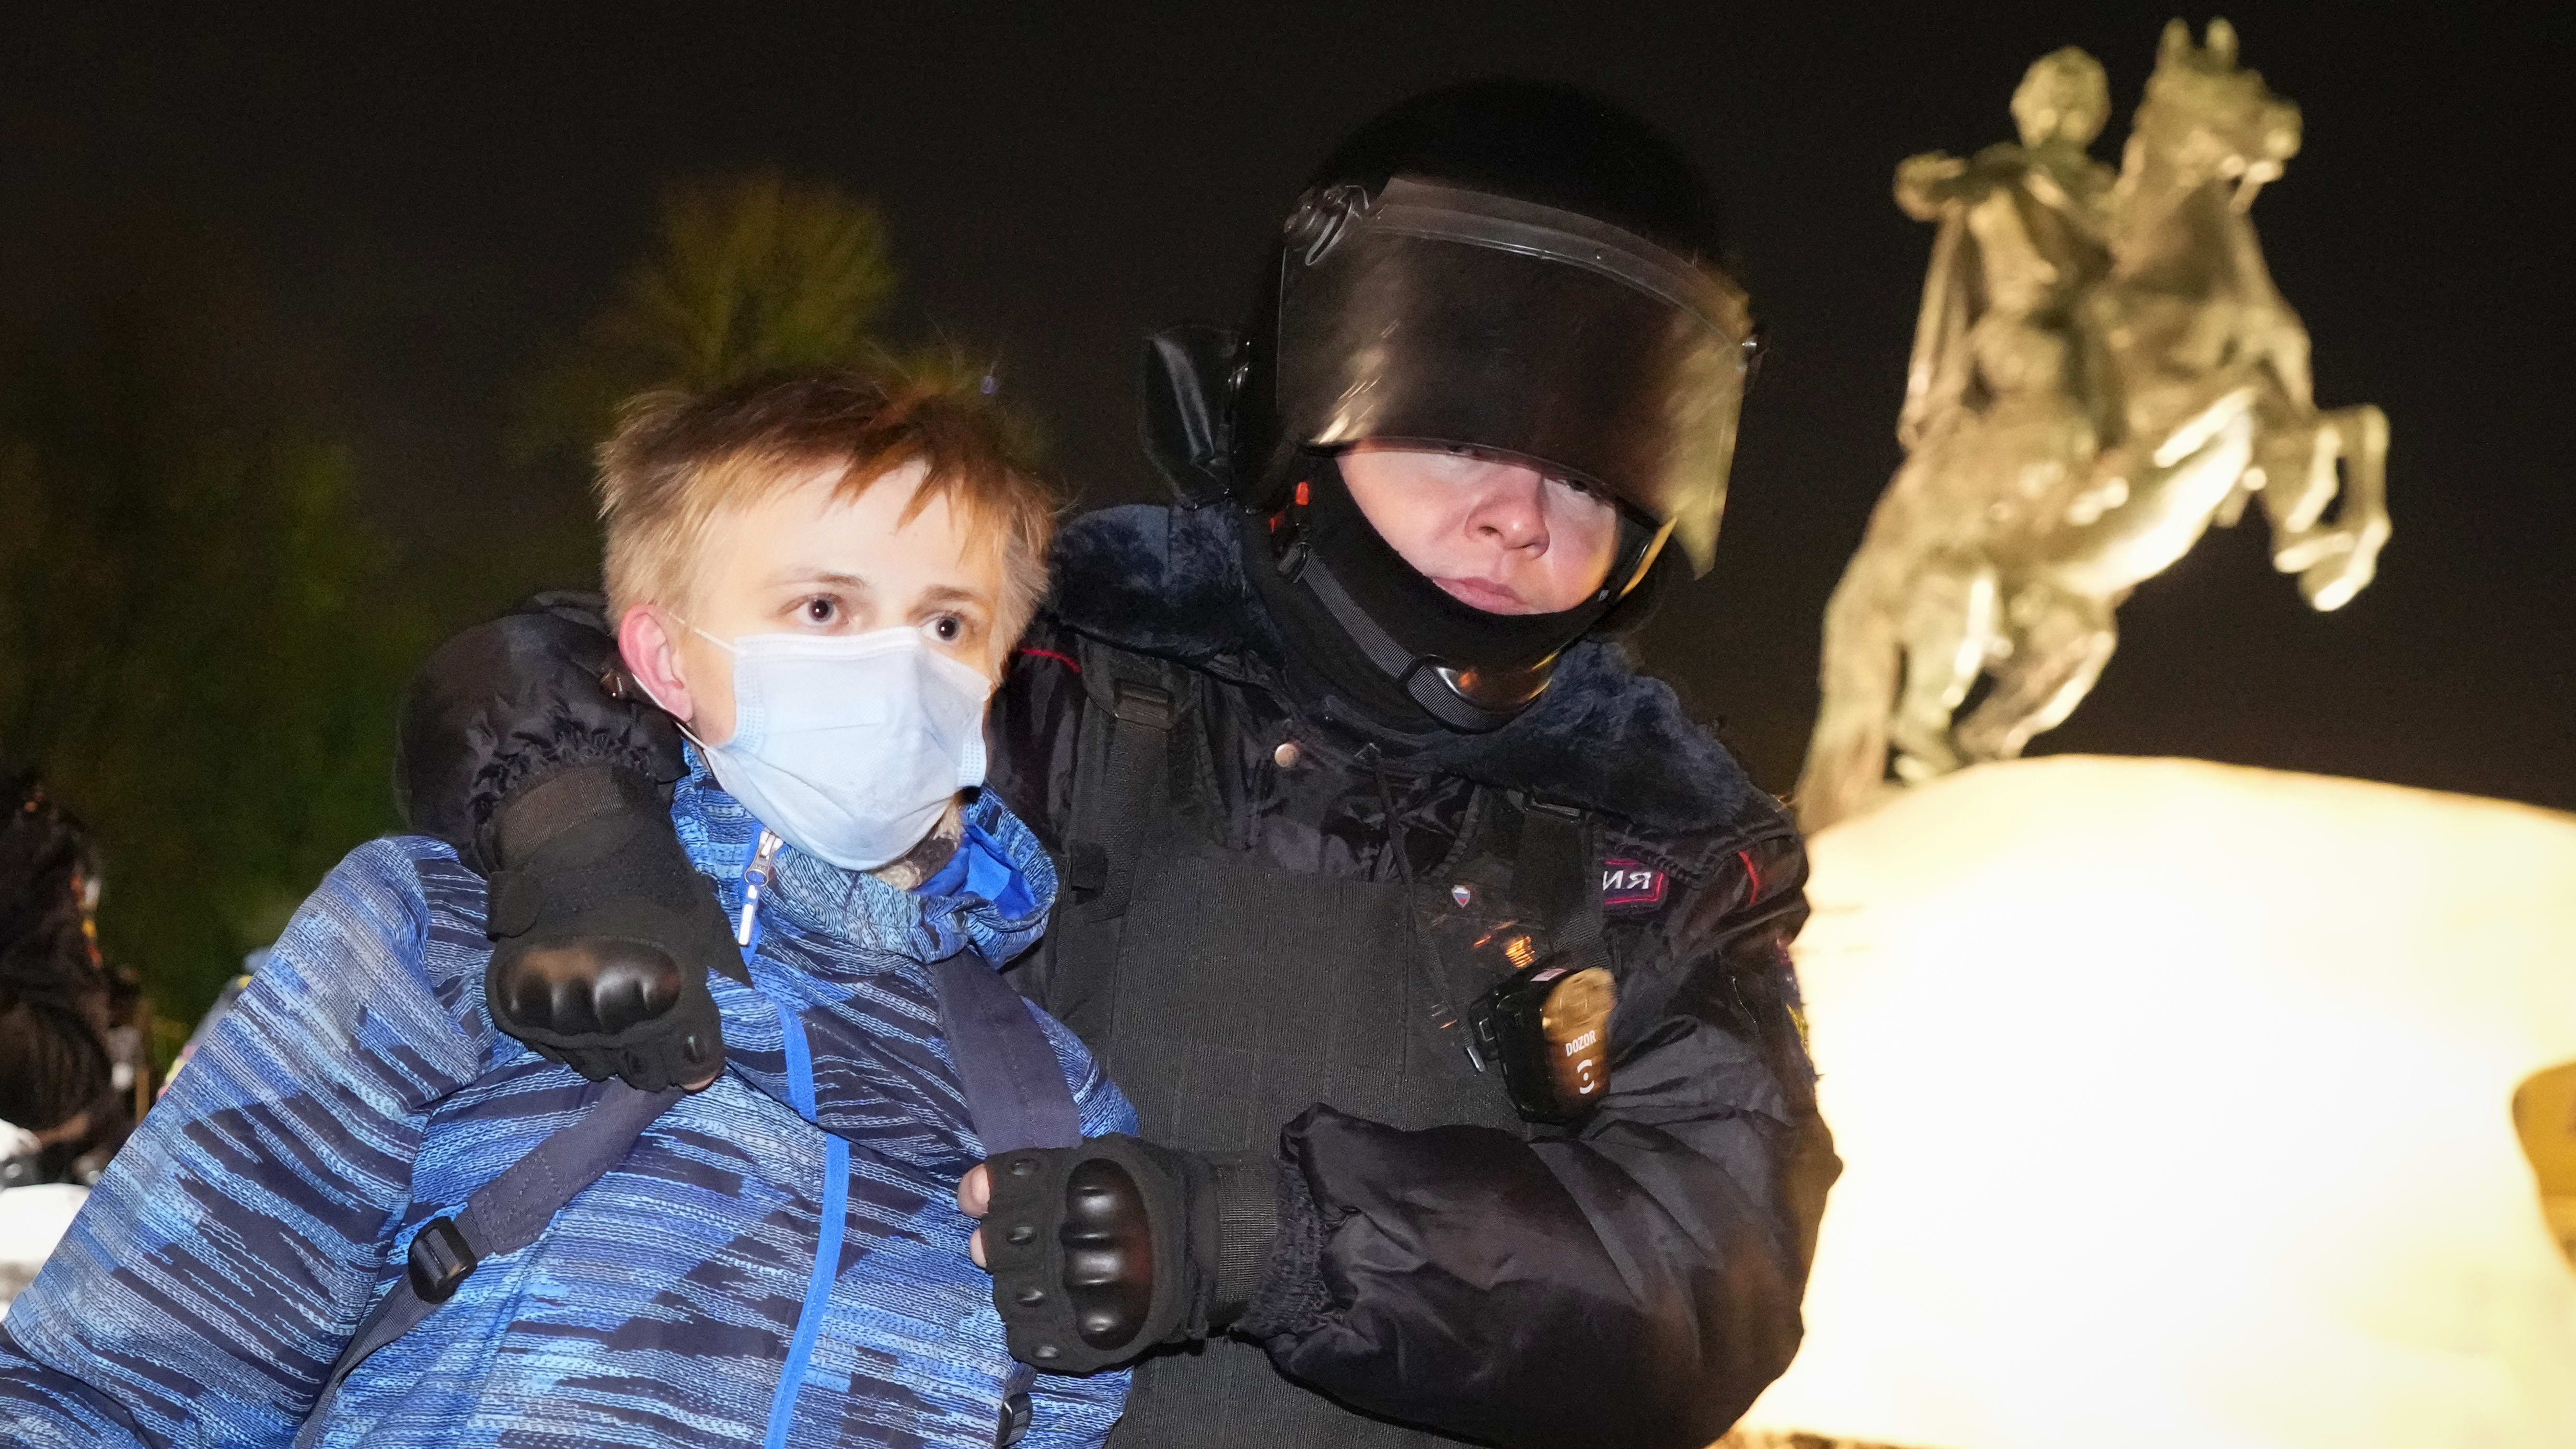 A Russian youth is arrested at an anti-war protest in St. Petersburg on Feb. 28.